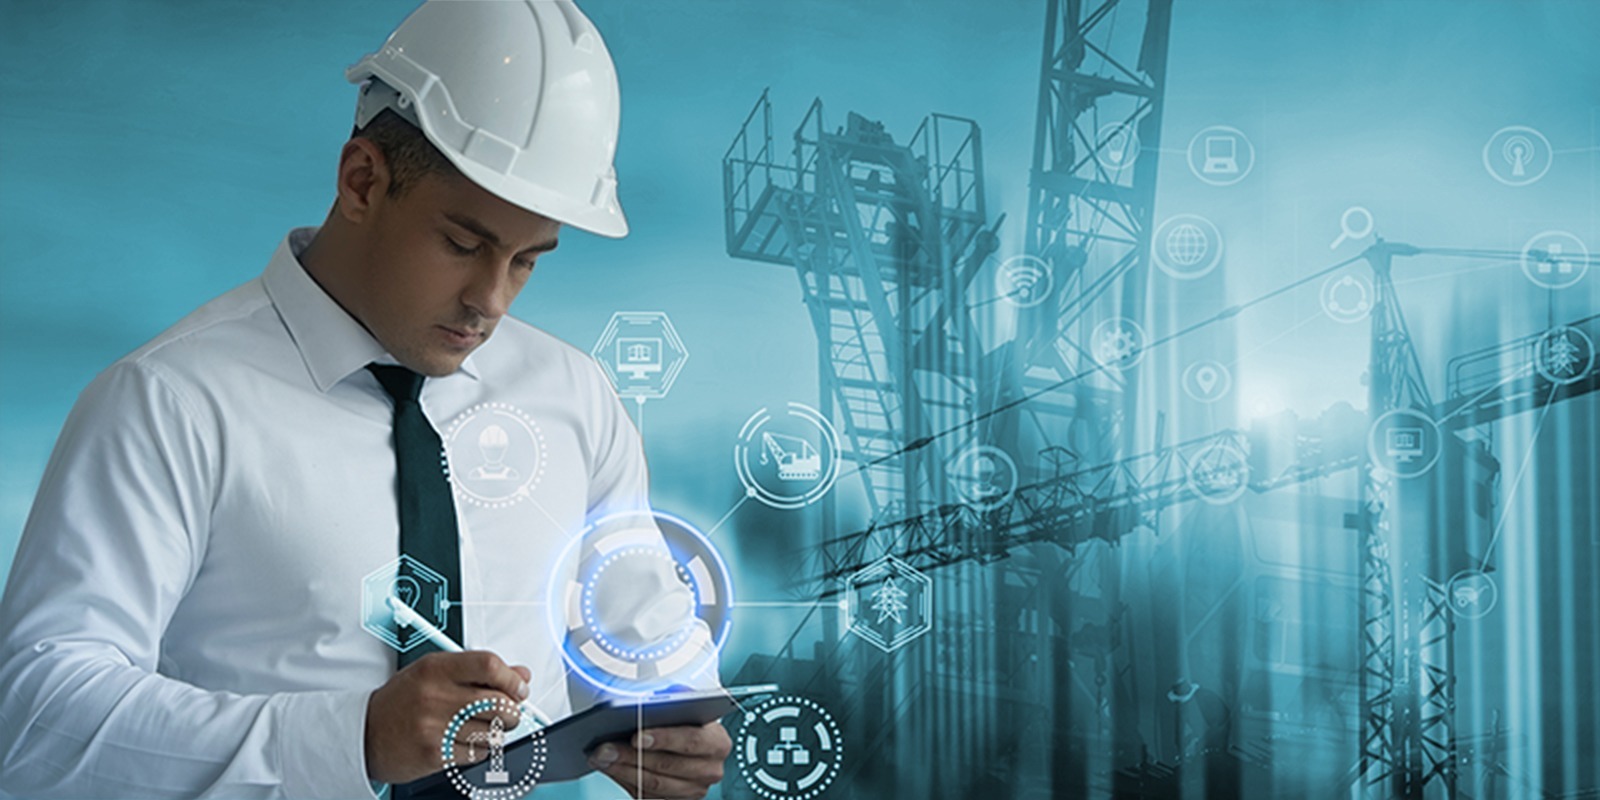 An project manager in a white hard hat holding a tablet with futuristic digital overlays of industrial symbols and connectivity icons, superimposed on an image of silhouetted cranes and construction framework in a blue-toned setting.